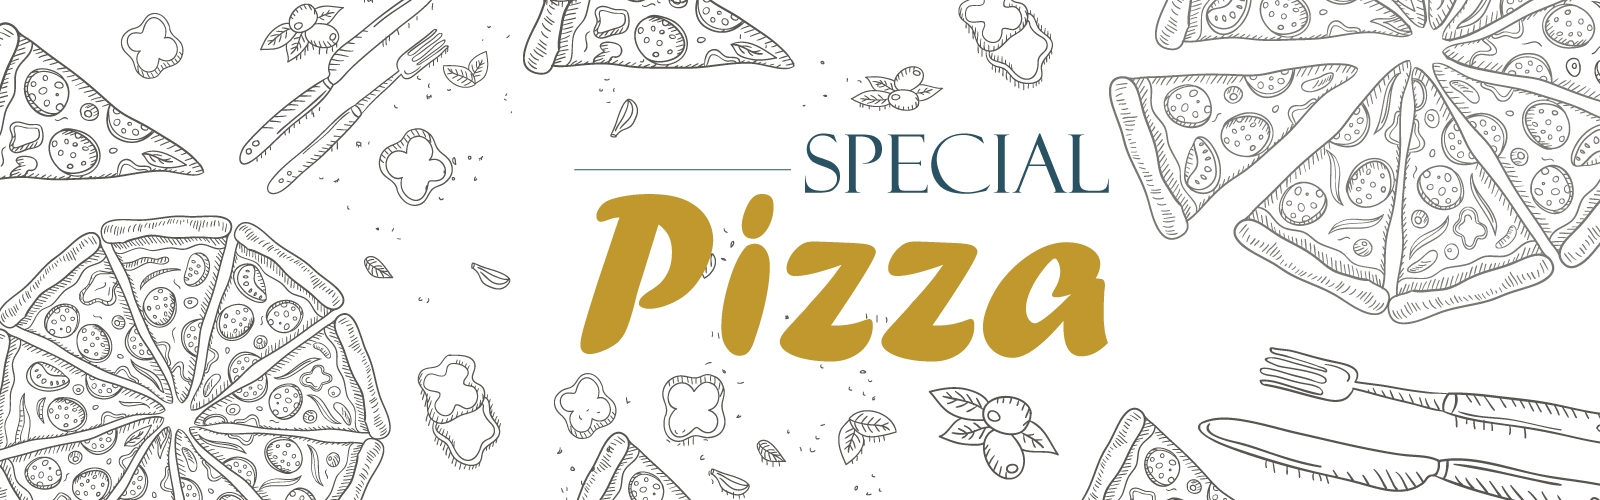 Special Pizza Selection